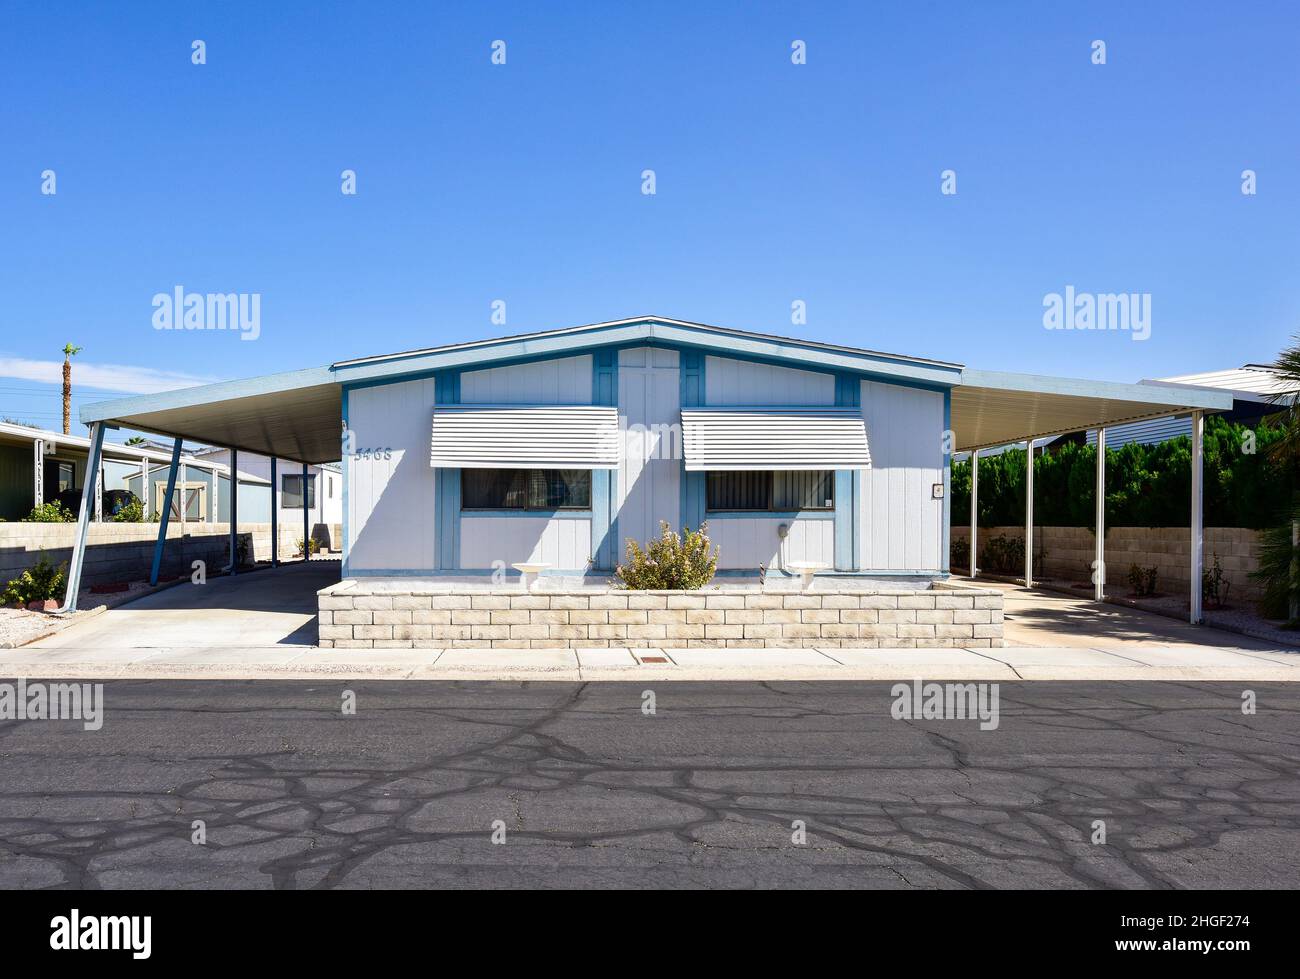 Residential manufactured house exterior in Las Vegas Stock Photo